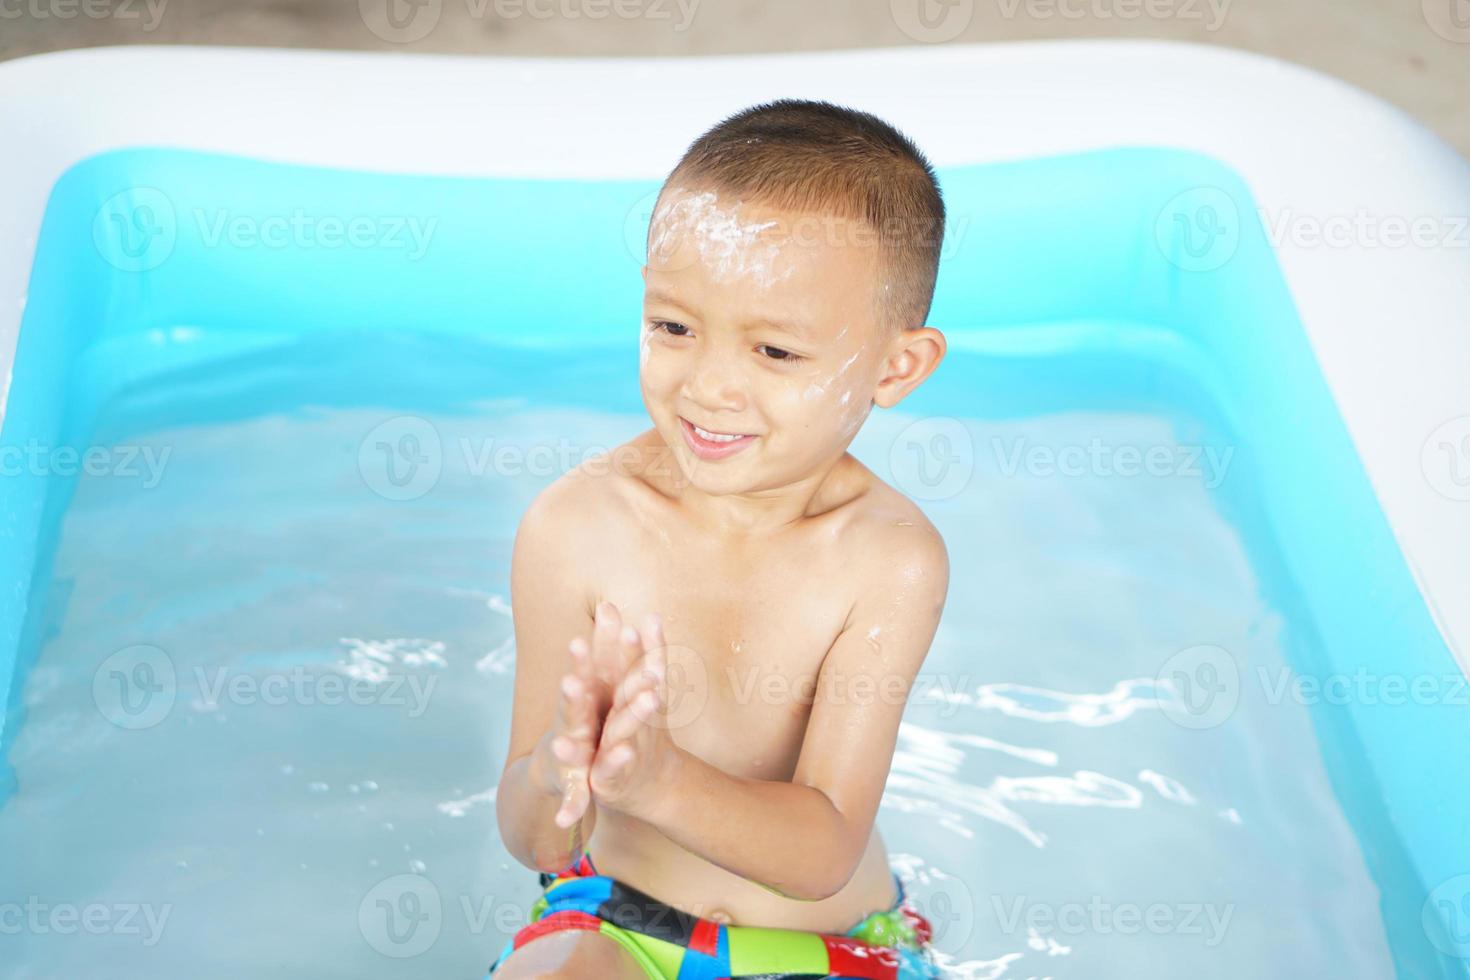 Hot weather. Boy playing with water happily in the tub. photo